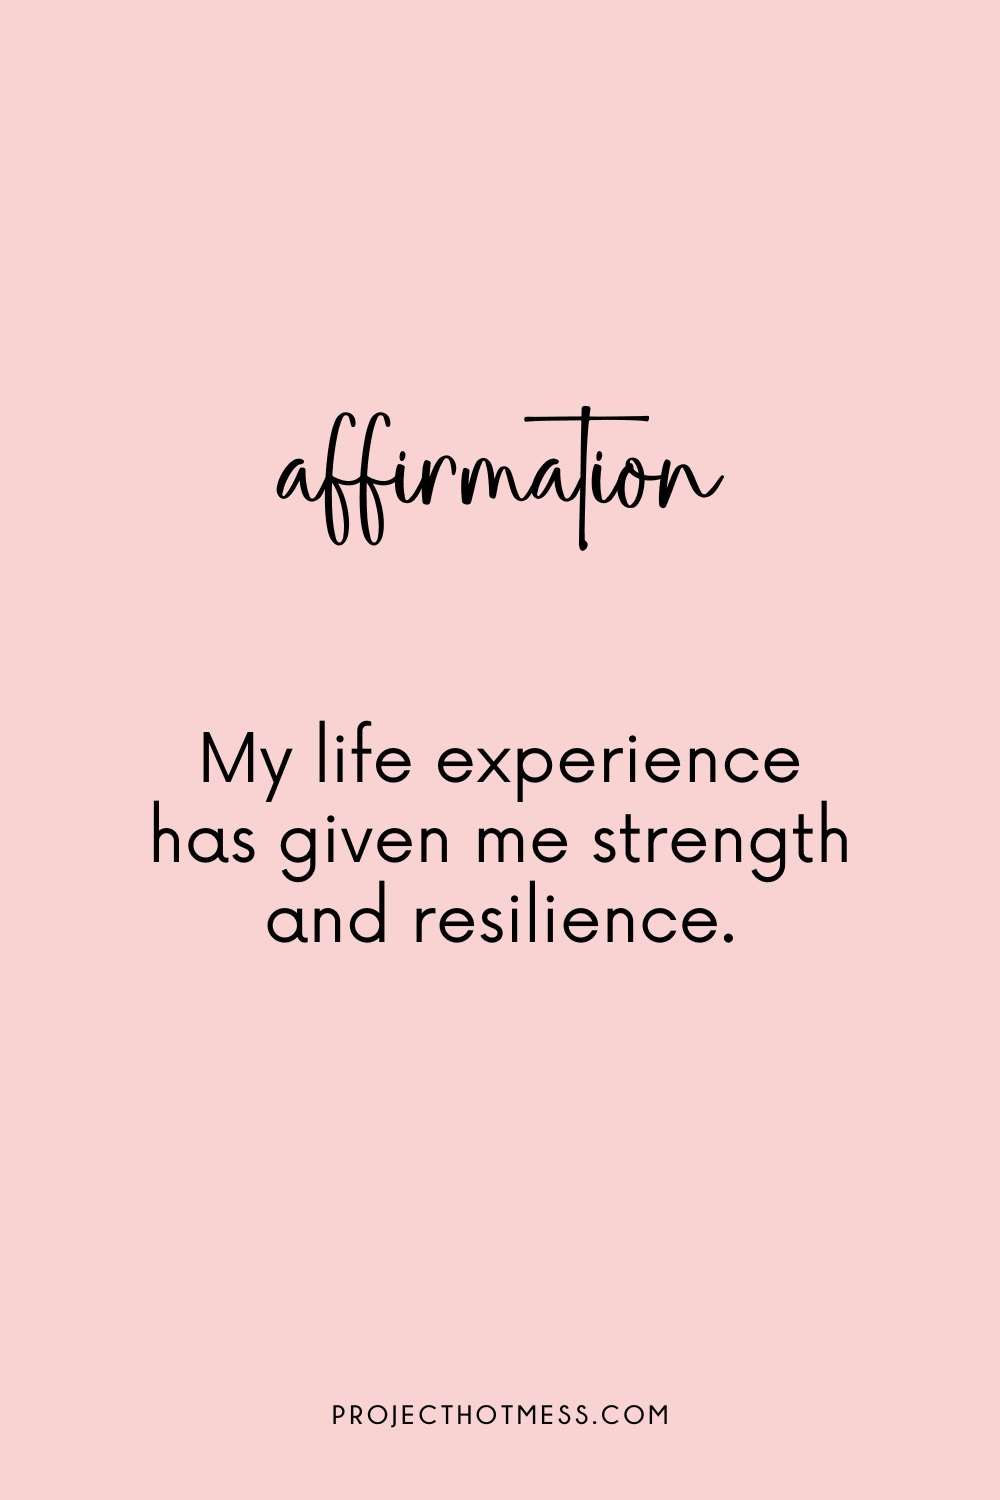 Turn the page to a new chapter in your life with grace. Our "Affirmations for Divorce" are here to hold your hand through the tough times. Pin this for daily doses of positivity and reminders of your inner strength. 📖💪 #NewChapter #InnerStrength